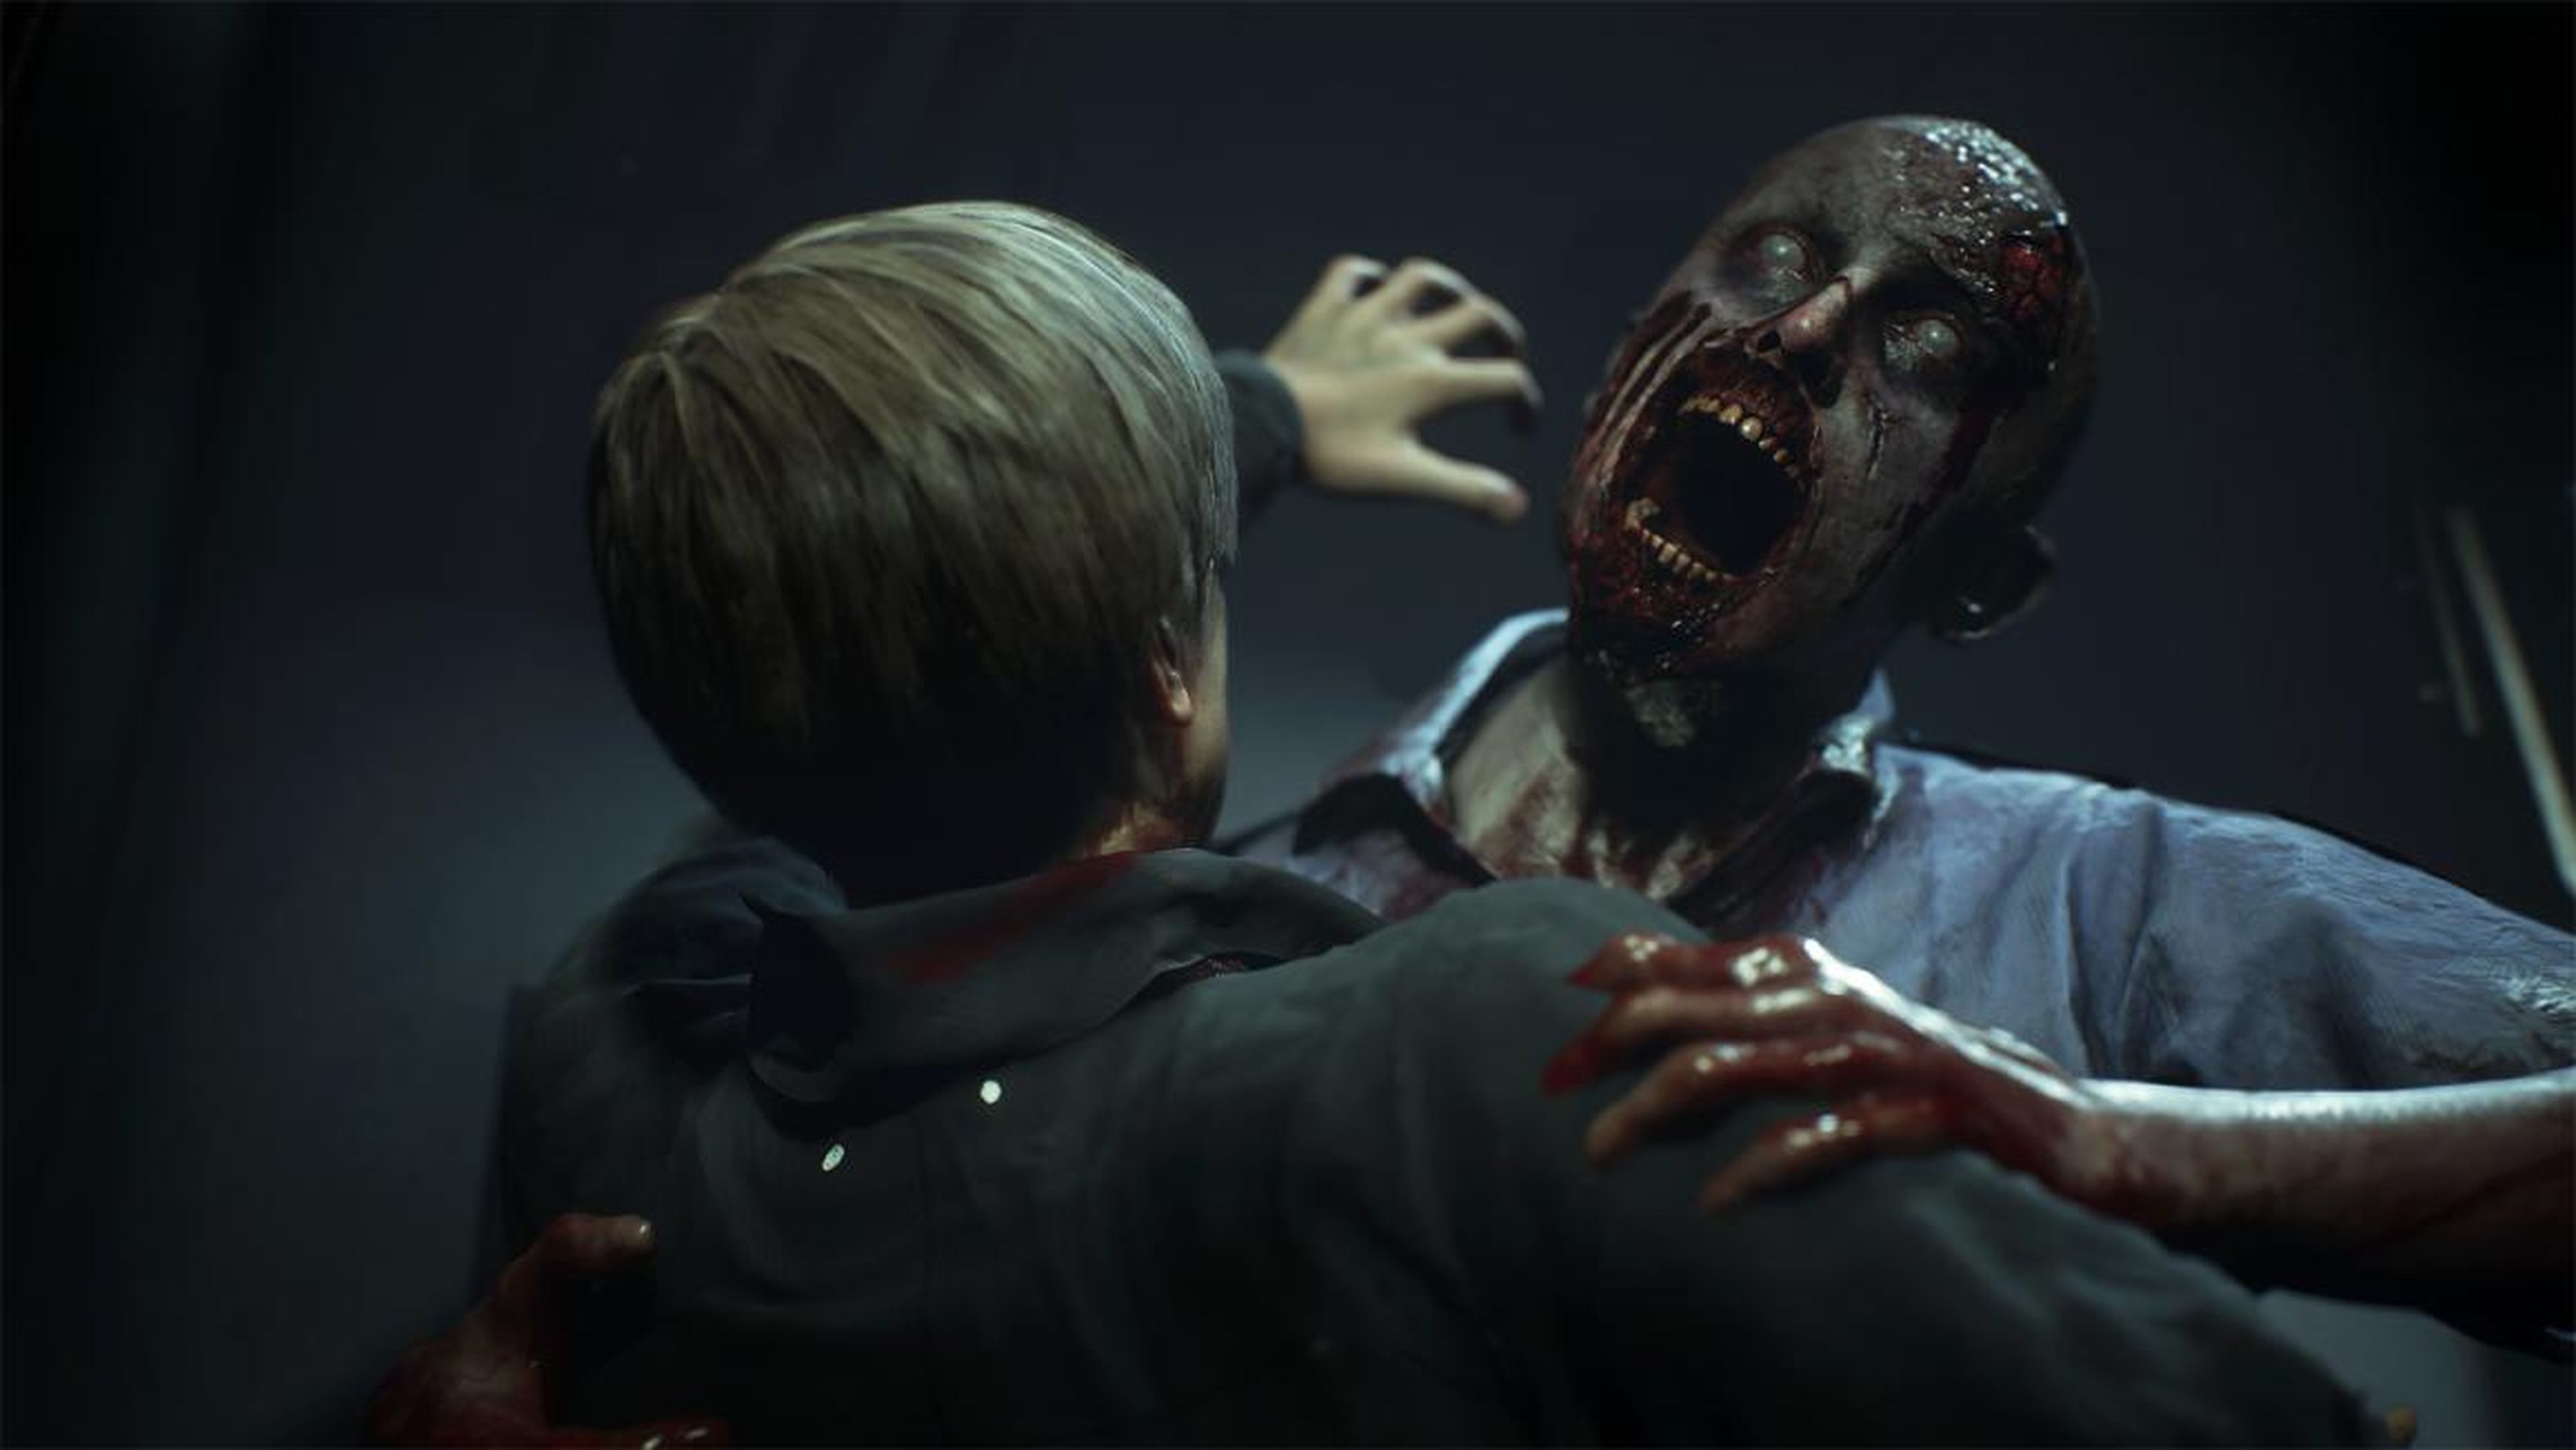 "Resident Evil" is back and looking better than ever.